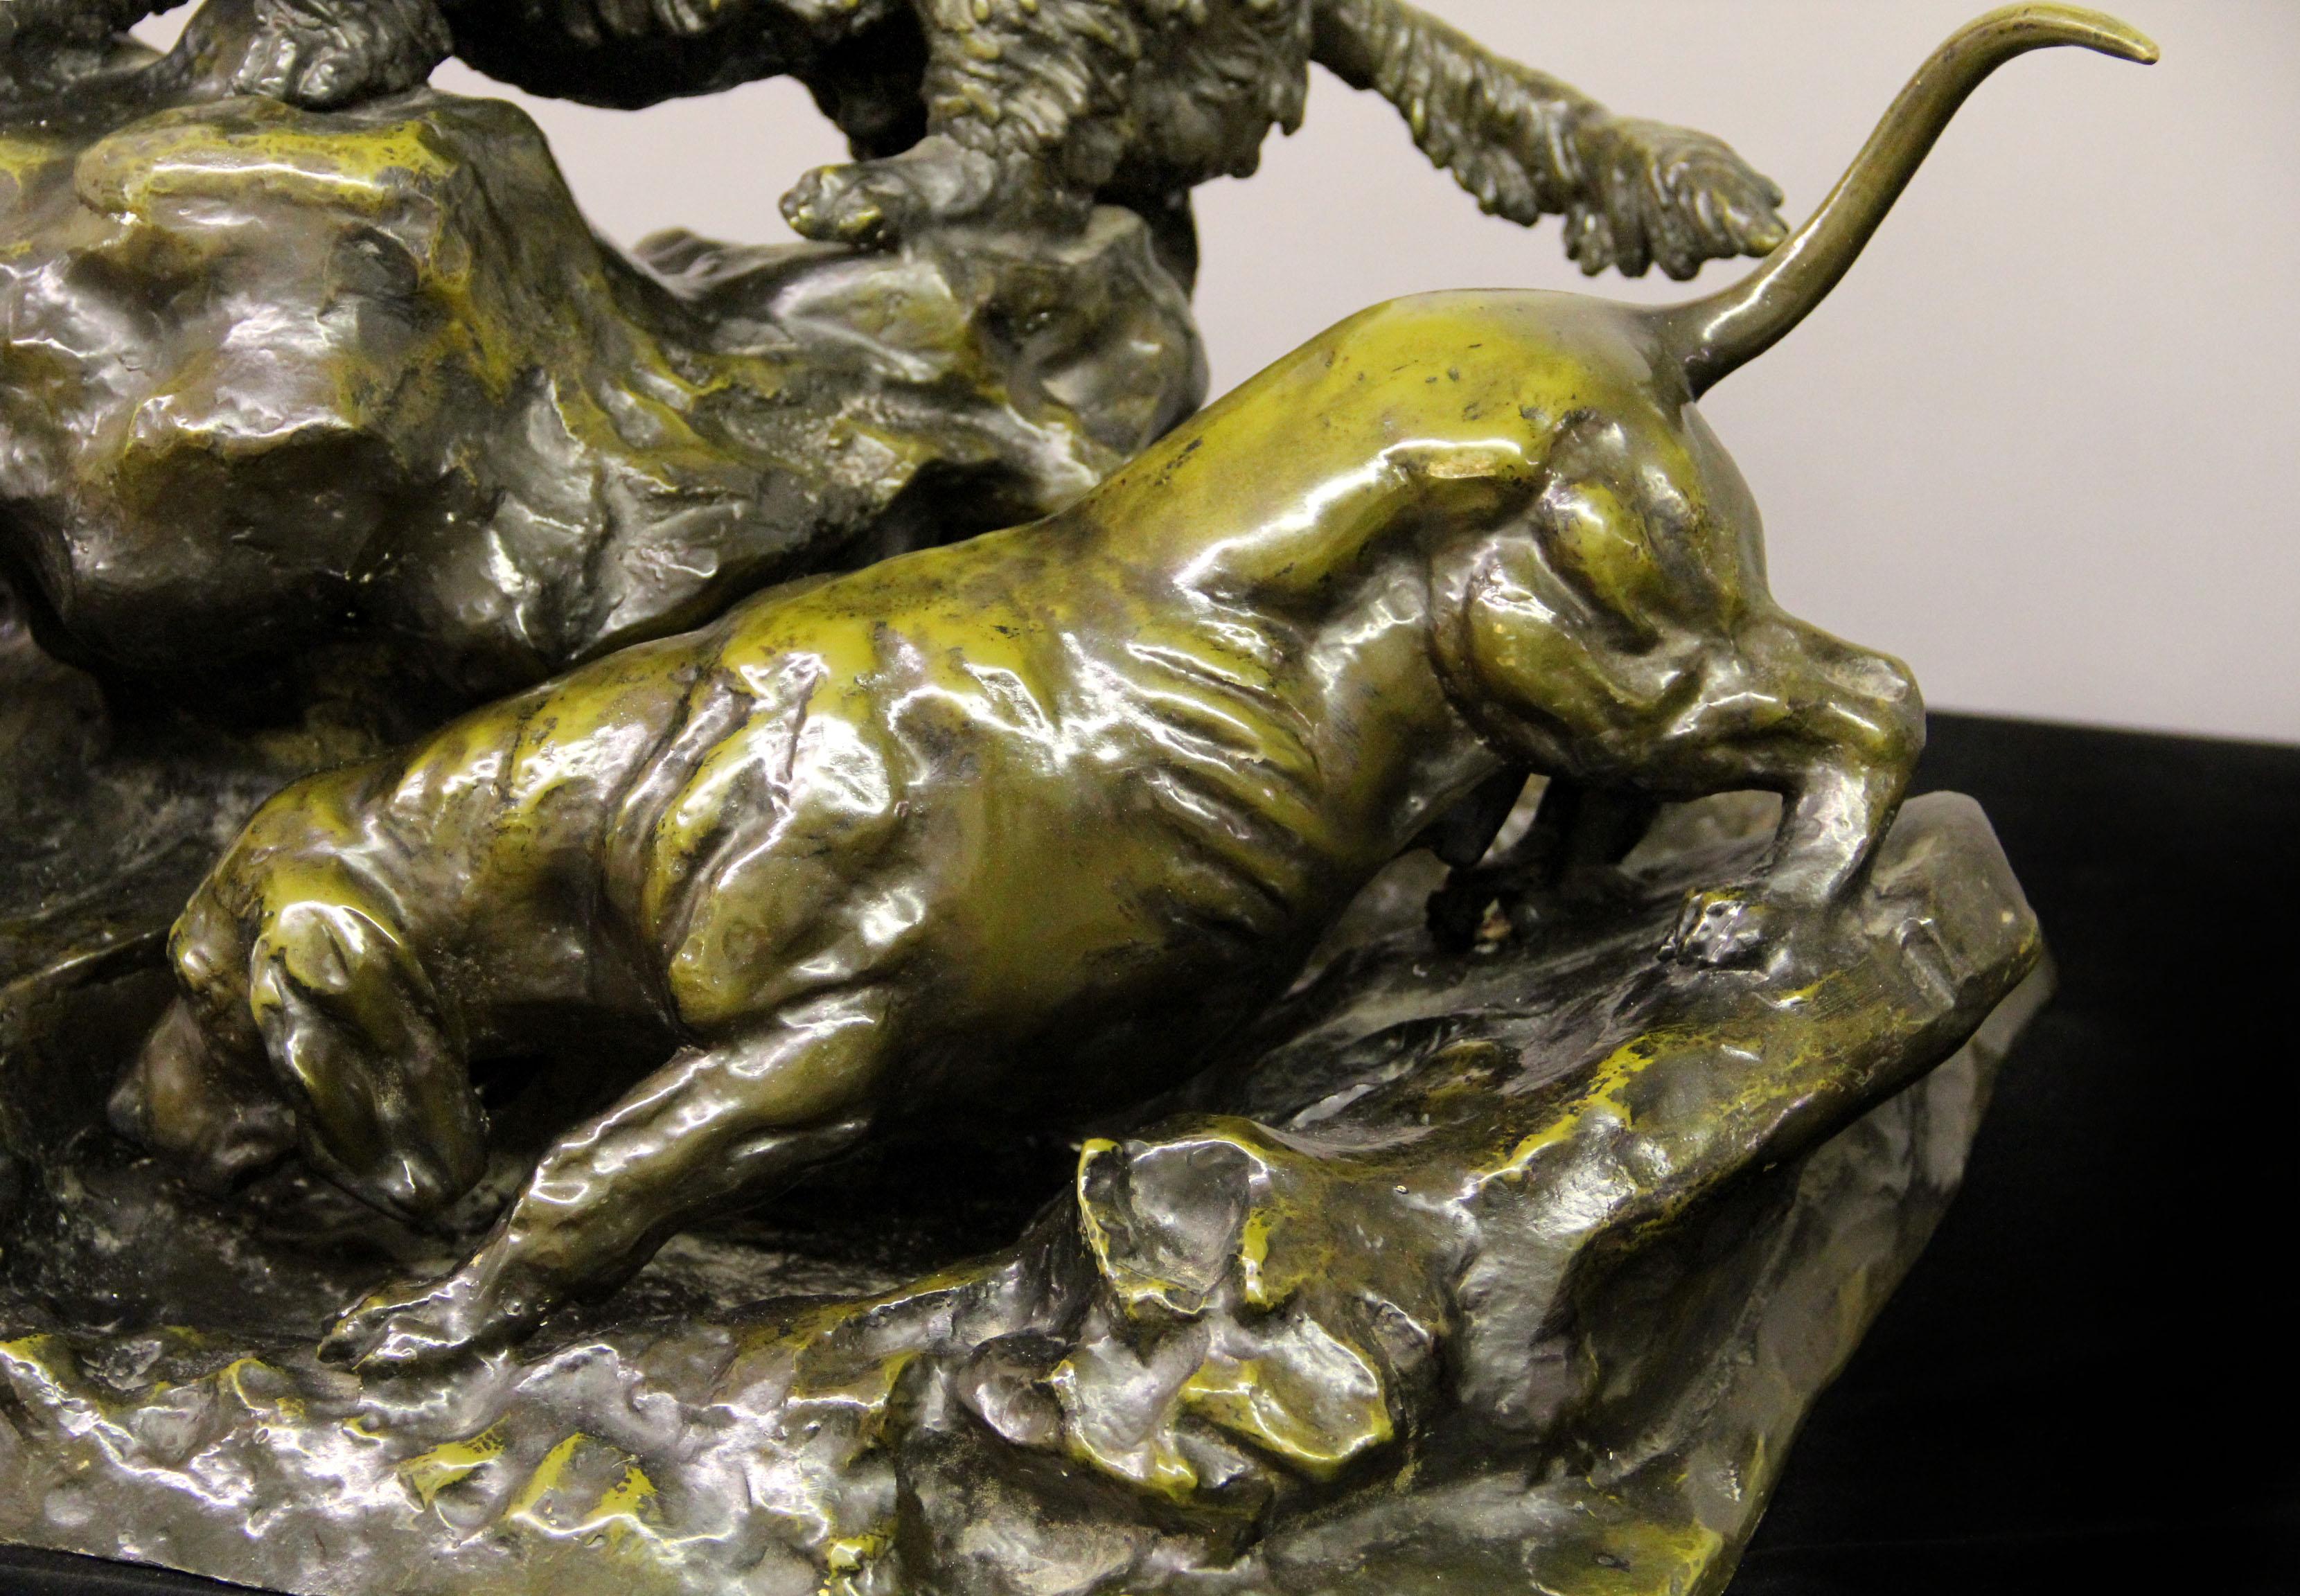 Late 19th century bronze patina dog sculpture entitled “Perros de Caza”

By Jules Moigniez

Depicting three hunting dogs searching the fox hole.

Jules Moigniez (28 May 1835 – 29 May 1894) was a French animalier sculptor who worked during the